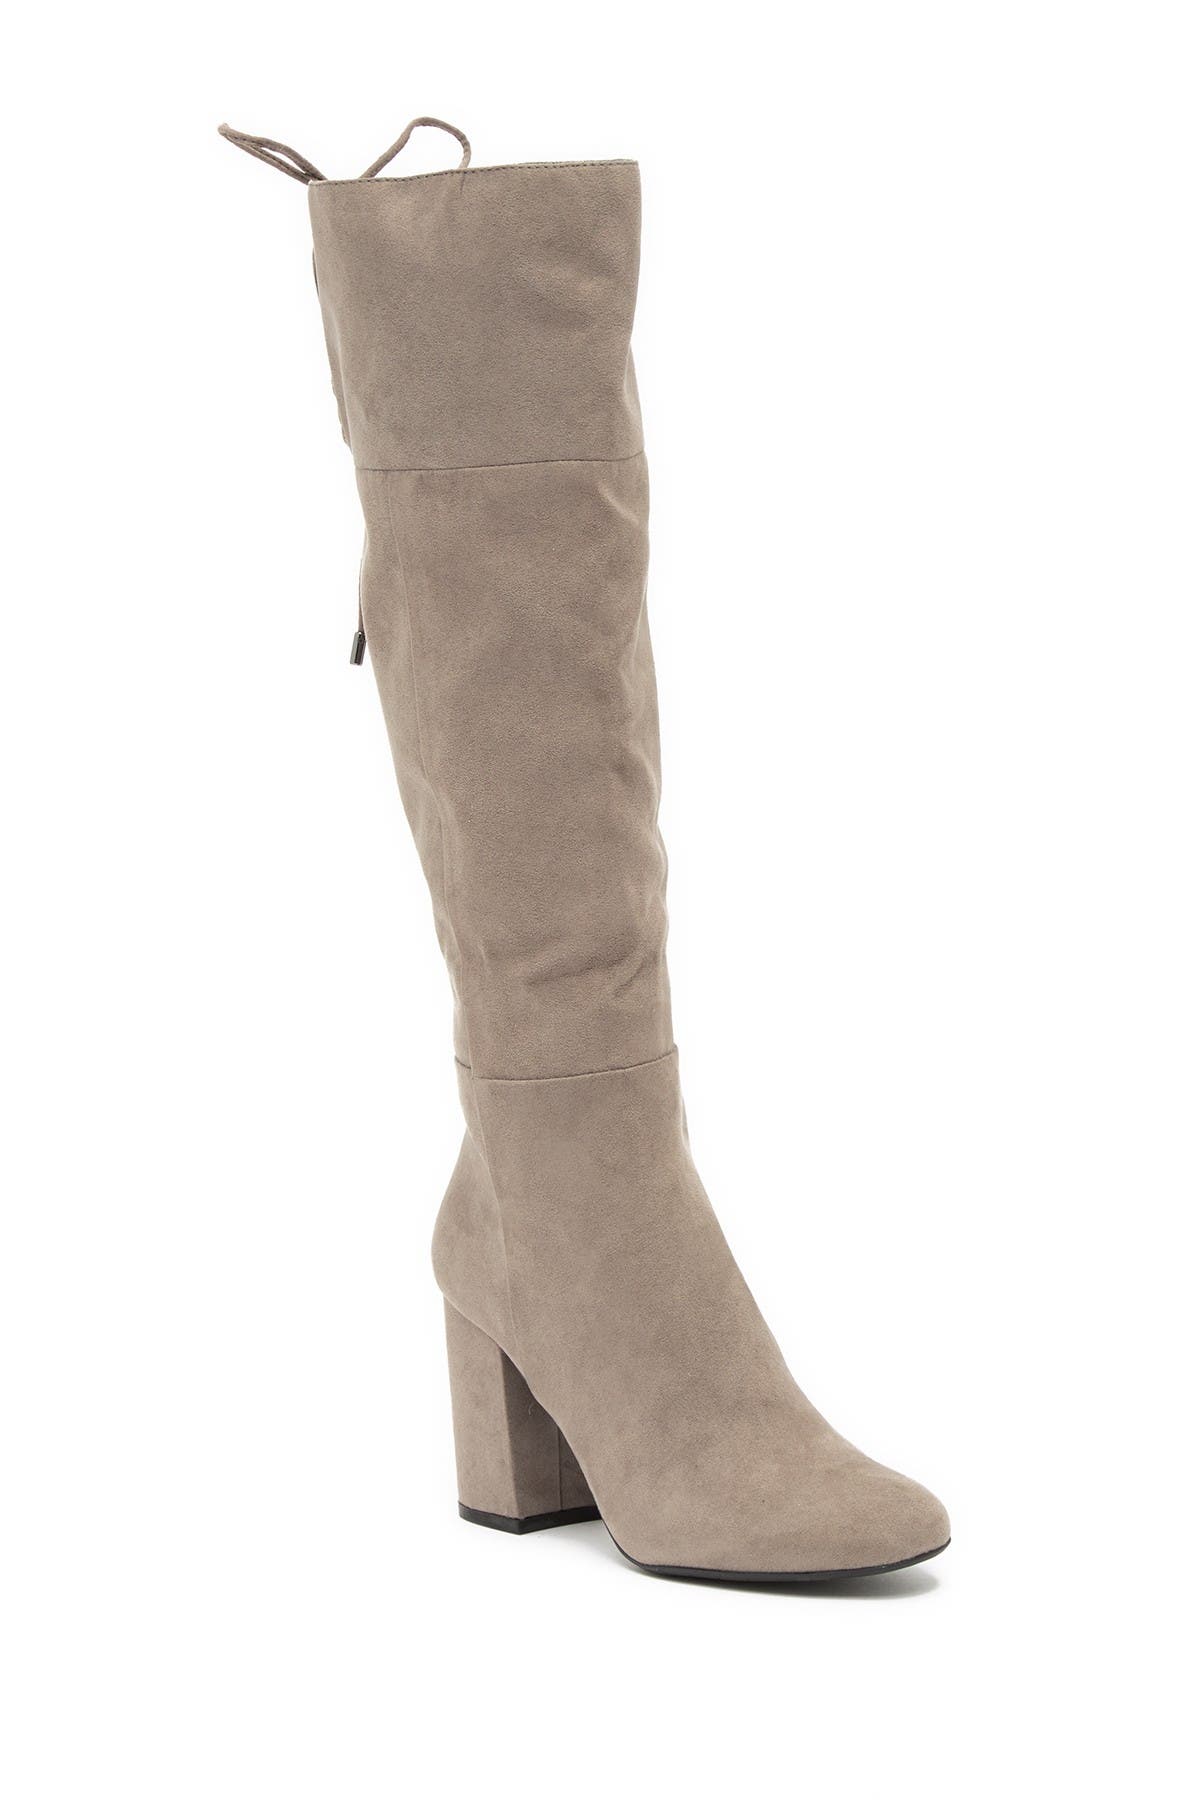 kenneth cole reaction corie boot